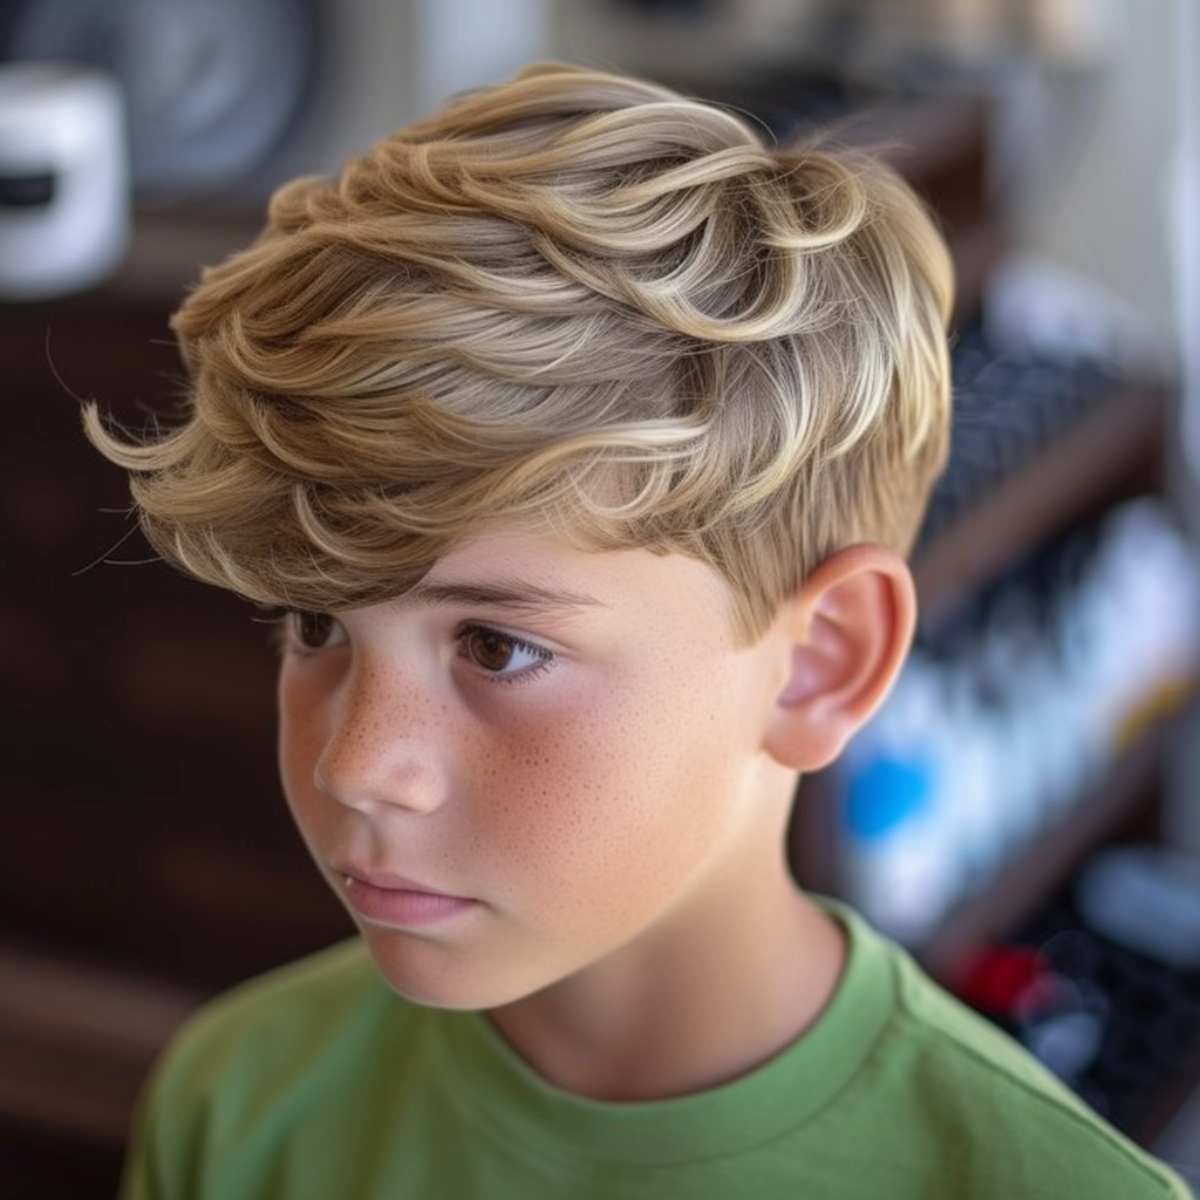 Little Boy Haircut Patterned Tousled